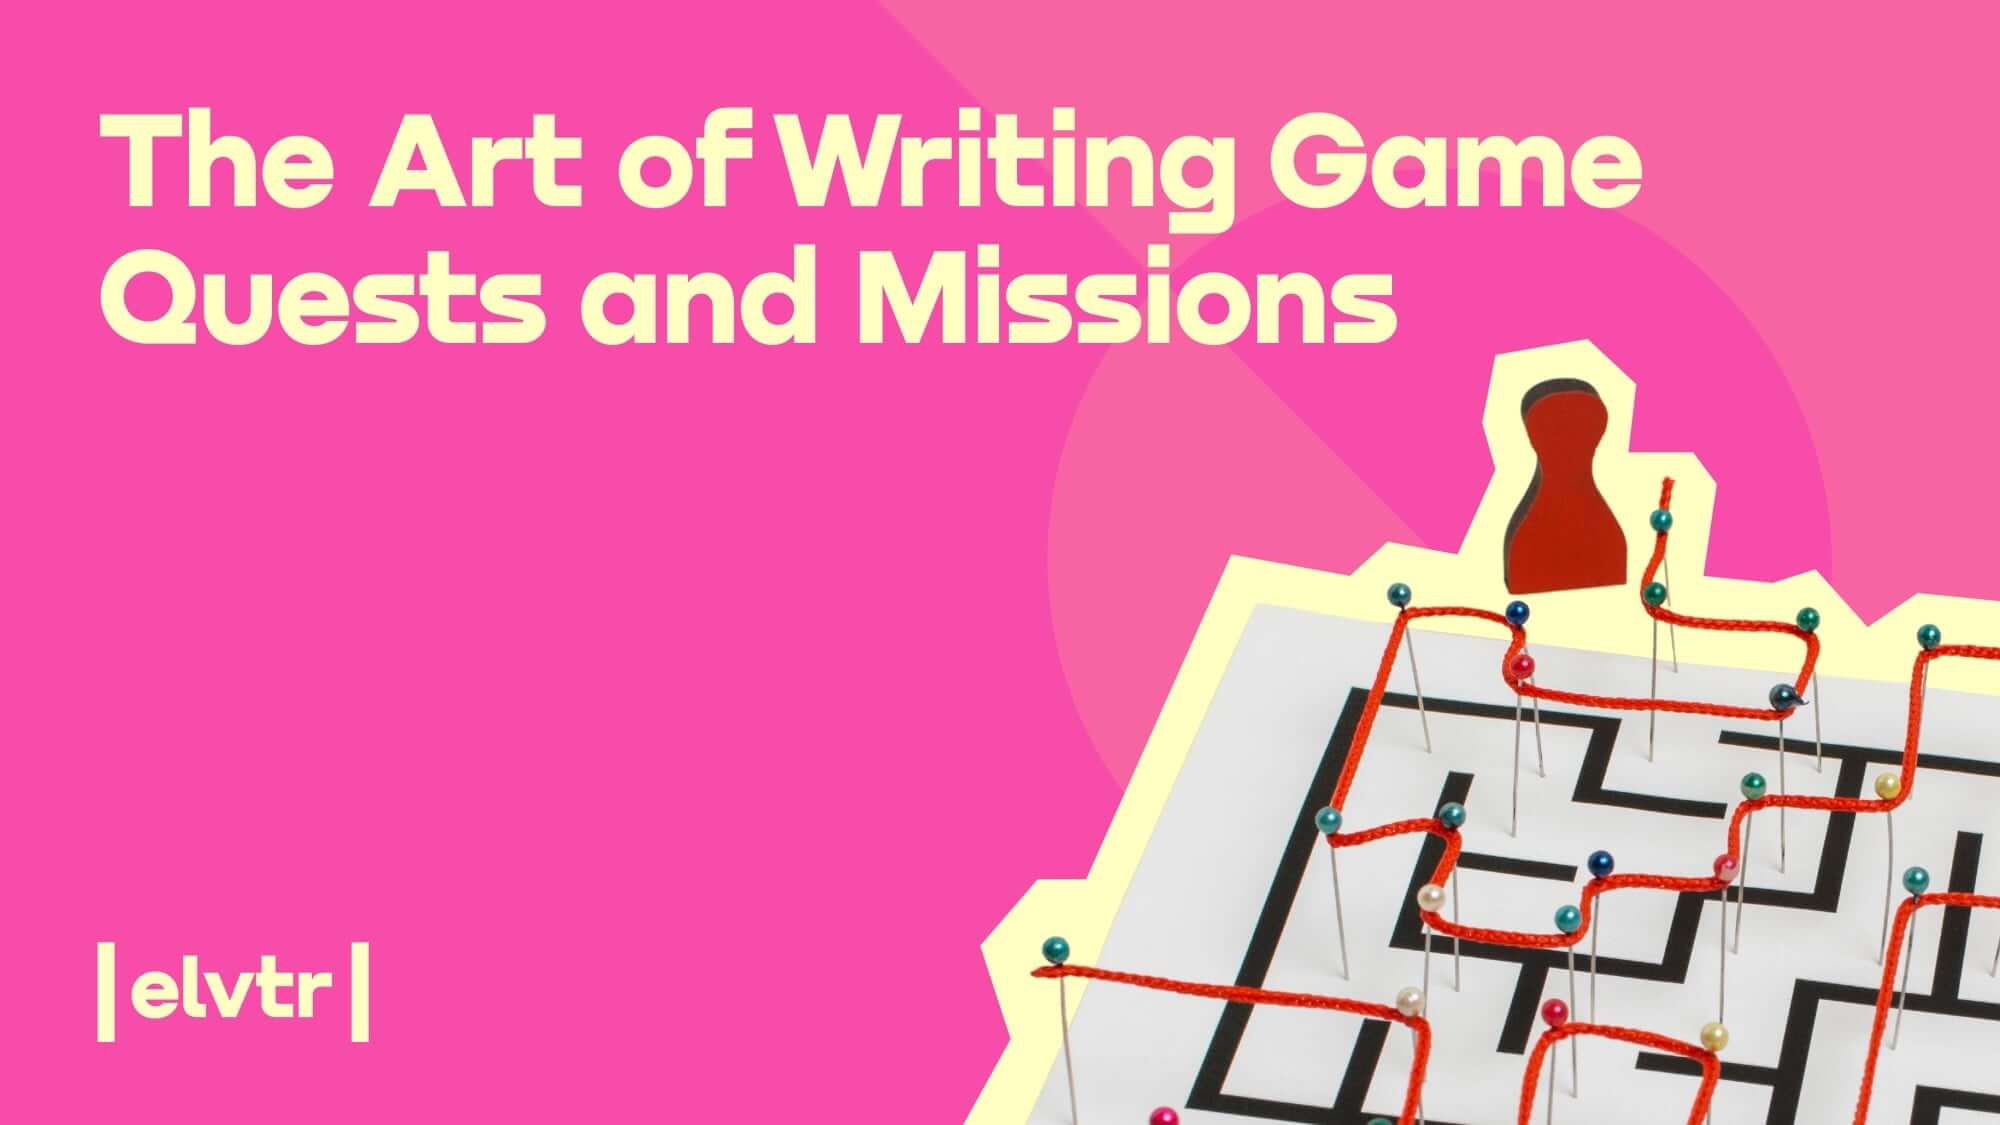 The Art of Writing Game Quests and Missions image